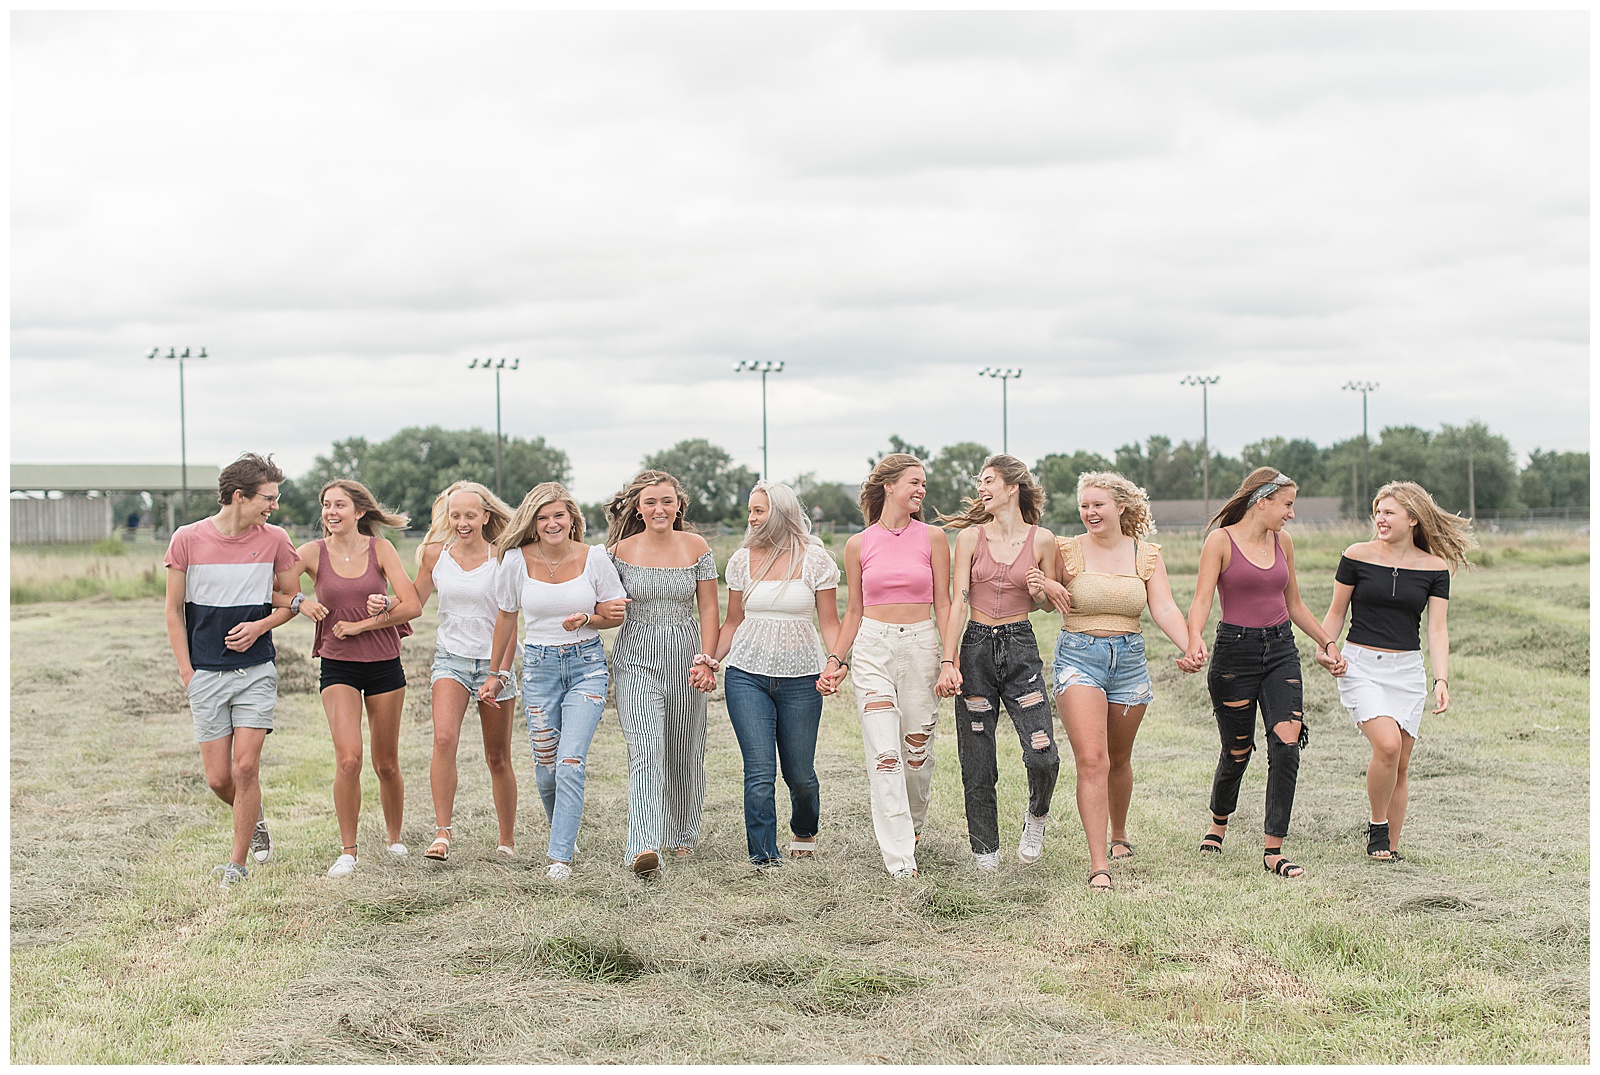 eleven senior spokesmodels smiling and looking at each other while walking in field toward camera in lancaster pennsylvania